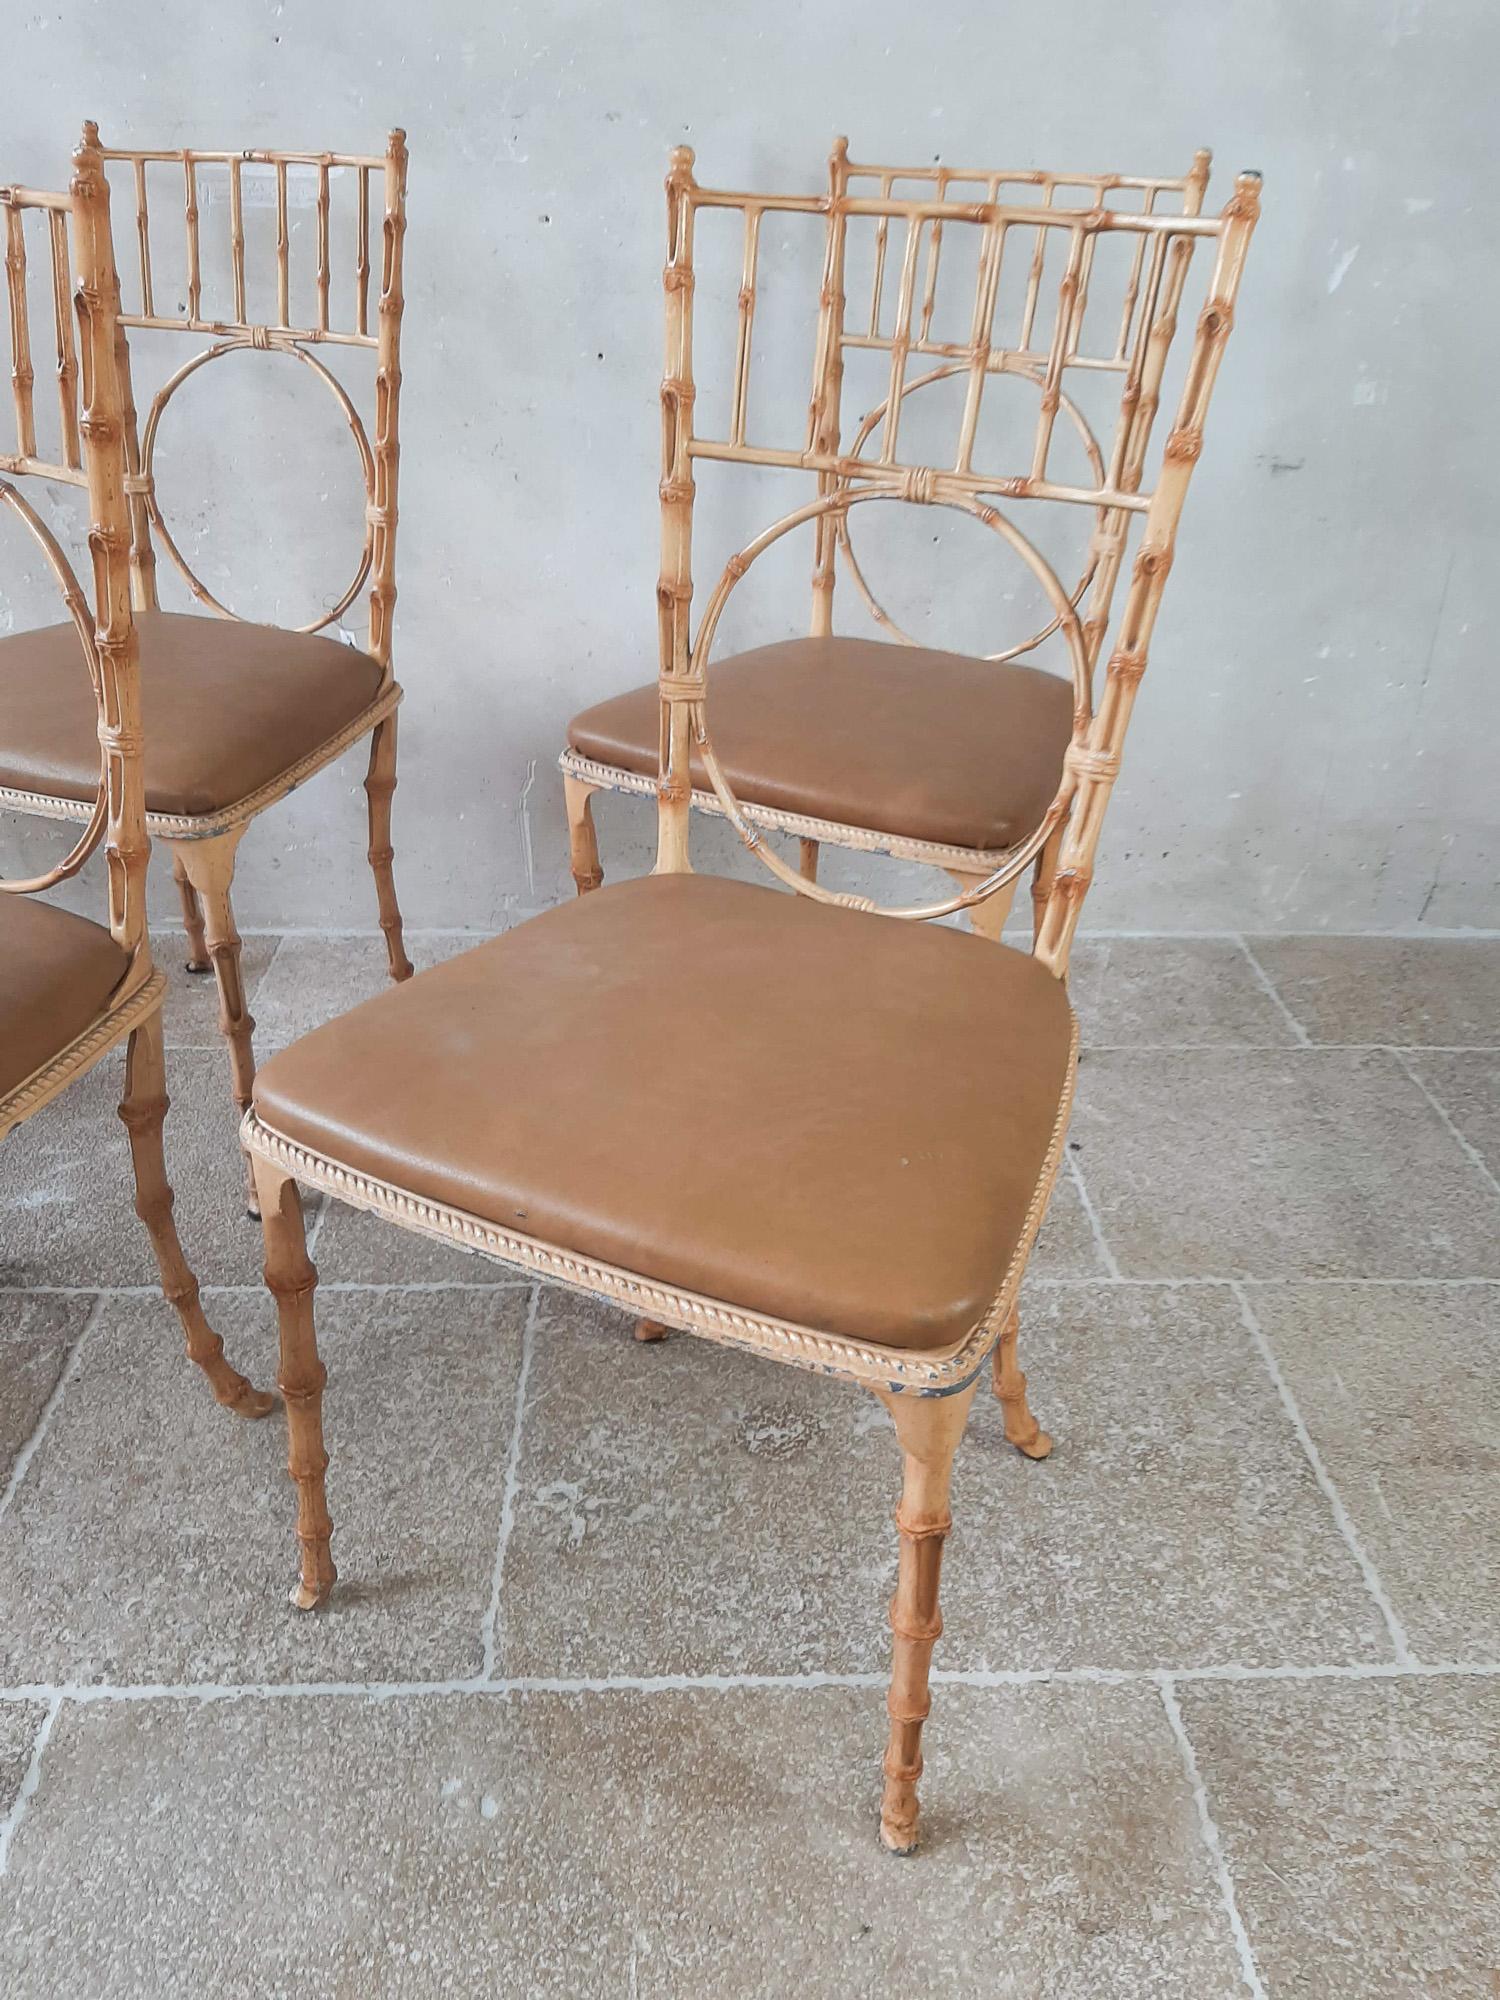 Set of 6 Midcentury Faux Bamboo Aluminium Painted Dining Chairs, 1950s For Sale 2